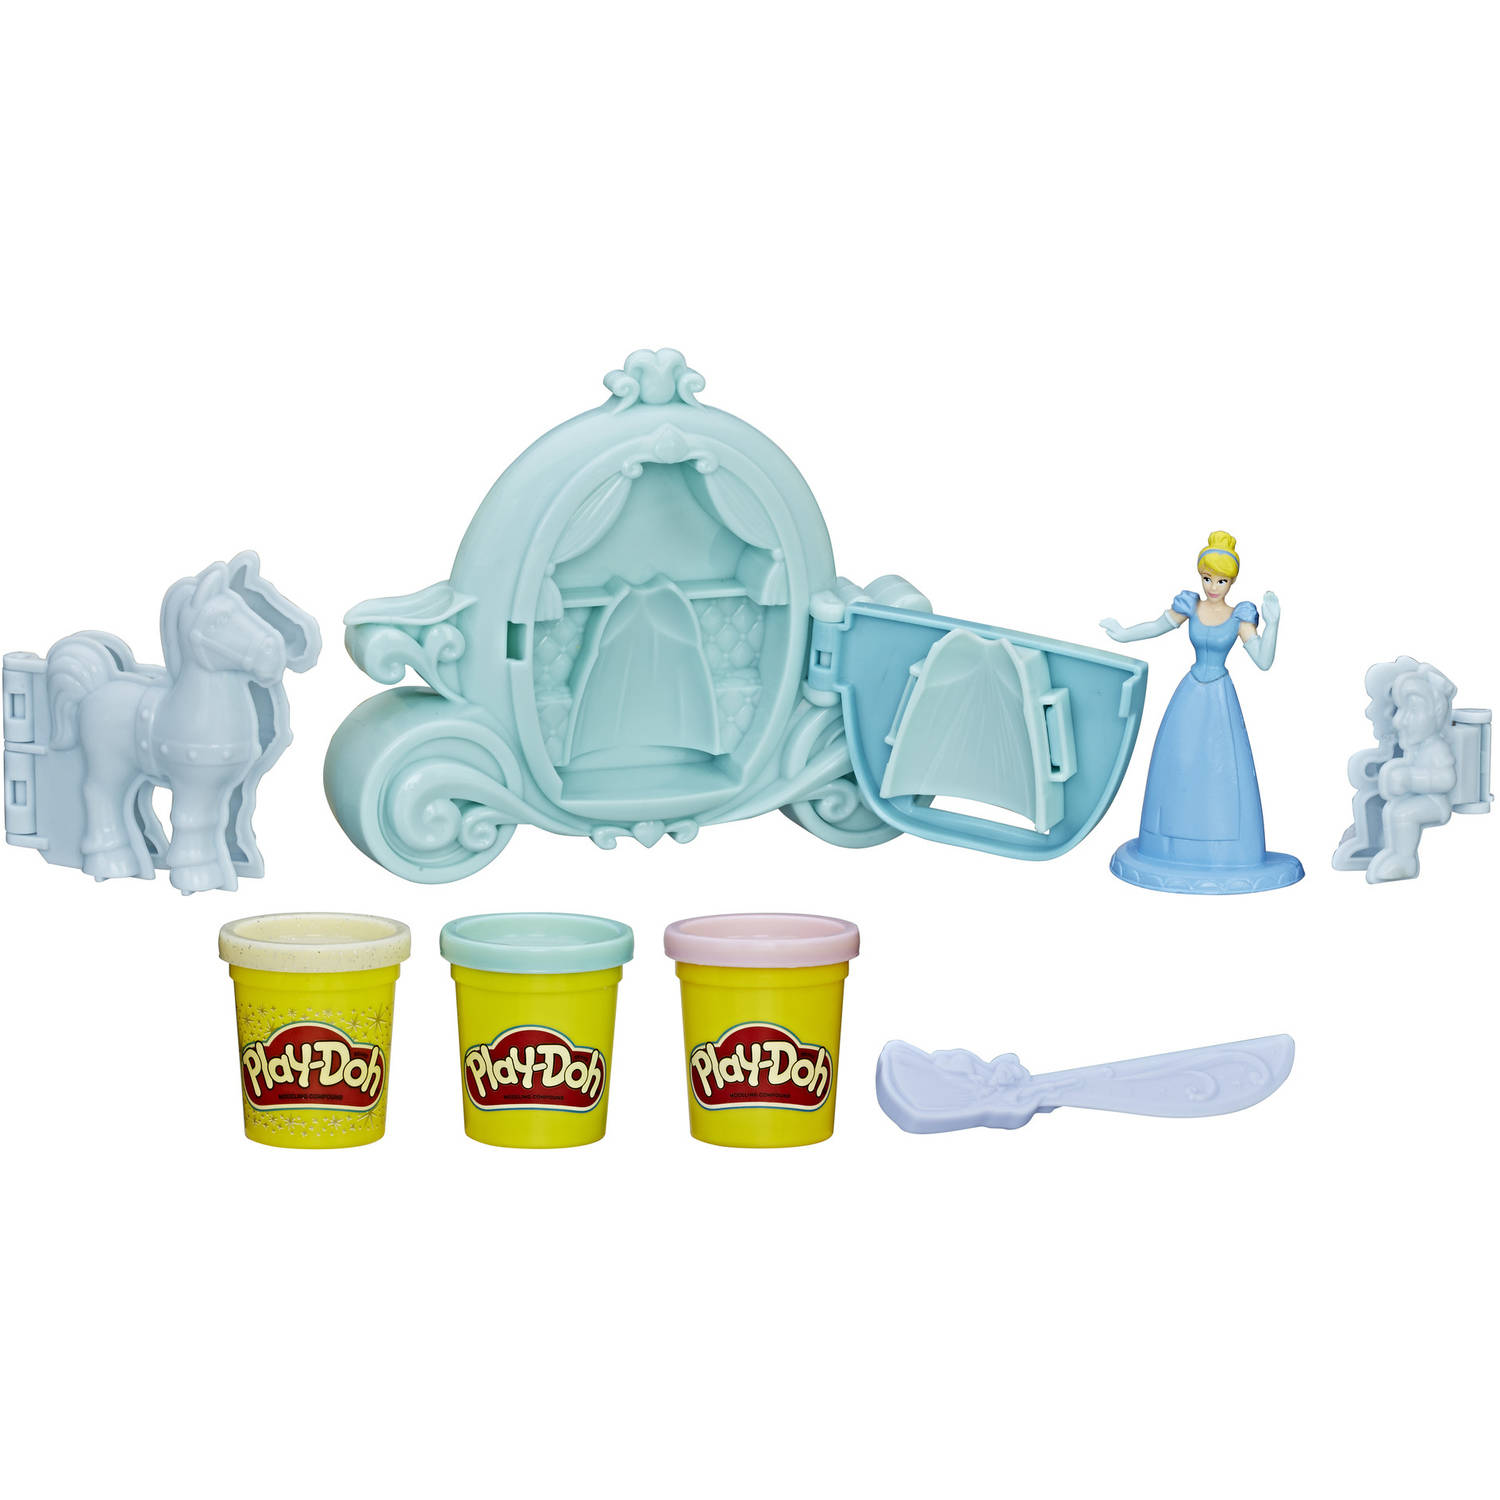 Play-Doh Disney Royal Carriage Set with Cinderella & 3 Cans of Play-Doh - image 2 of 12